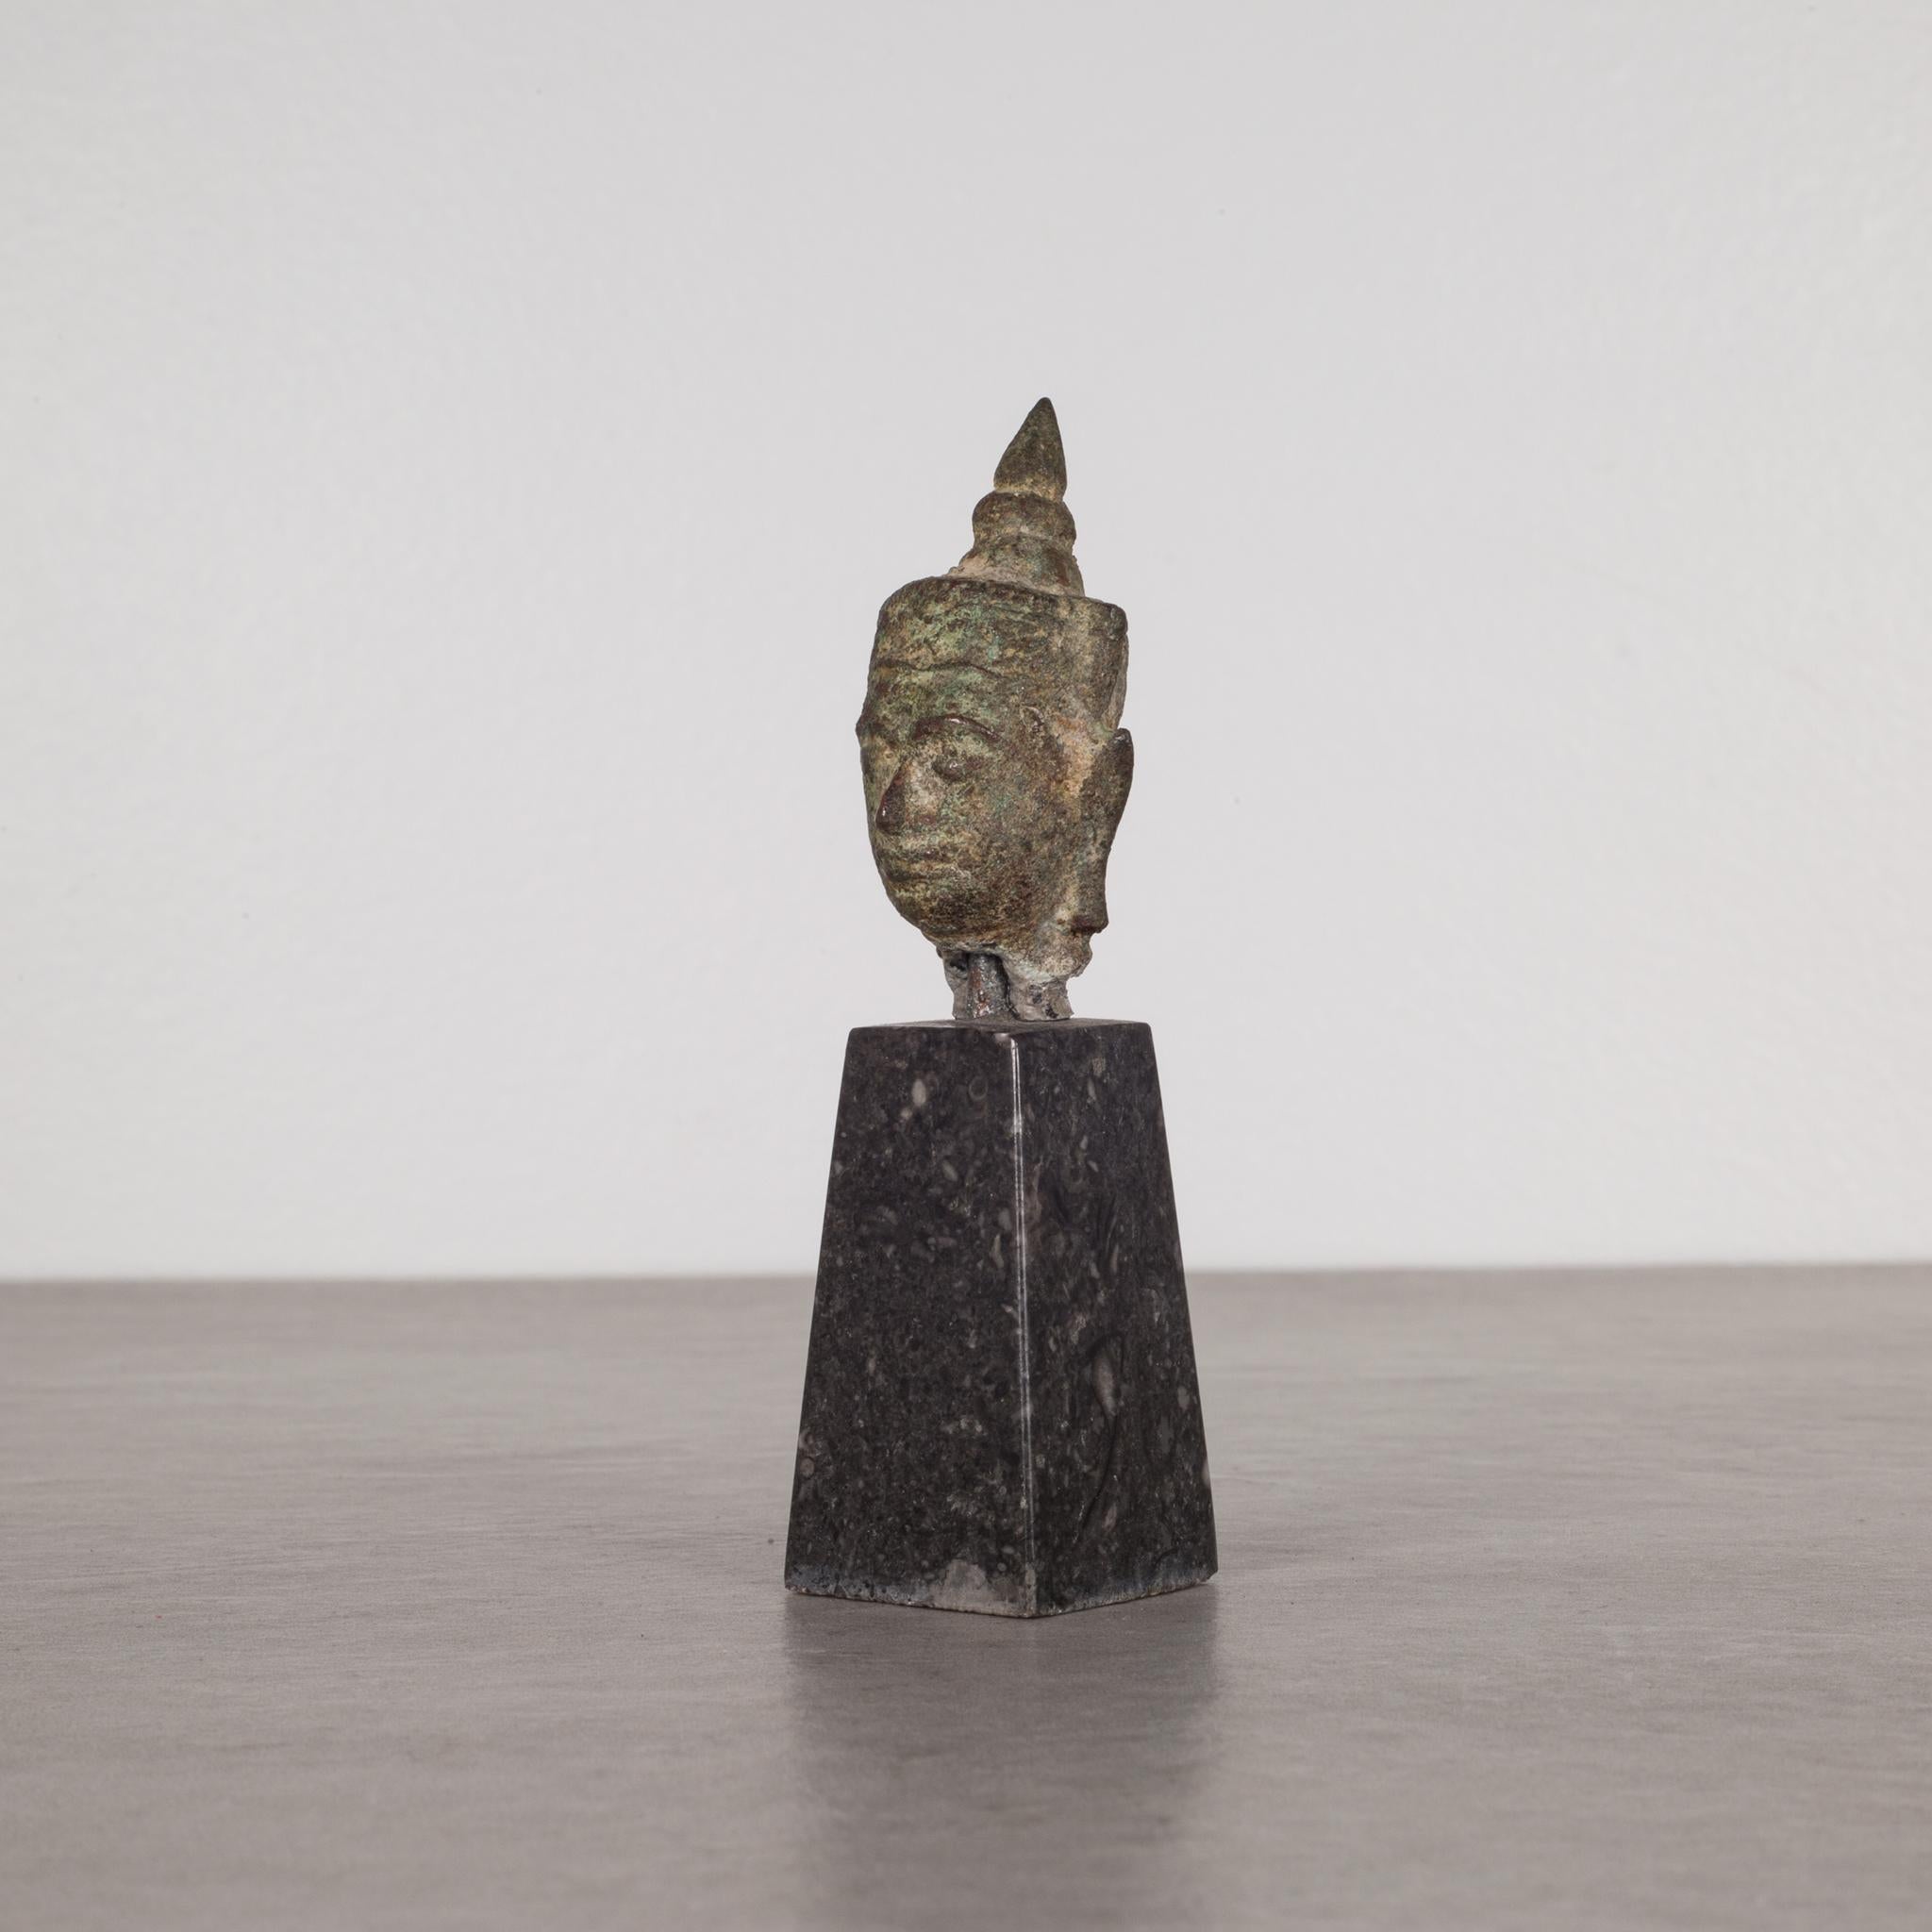 About

This is an original lost-wax casting bronze head of Buddah Shakyamuni from the 19th century, Thailand. It is mounted on a contemporary marble base. His meditative expression, arched eyebrows, downcast eyes, smiling lips, elongated earlobes